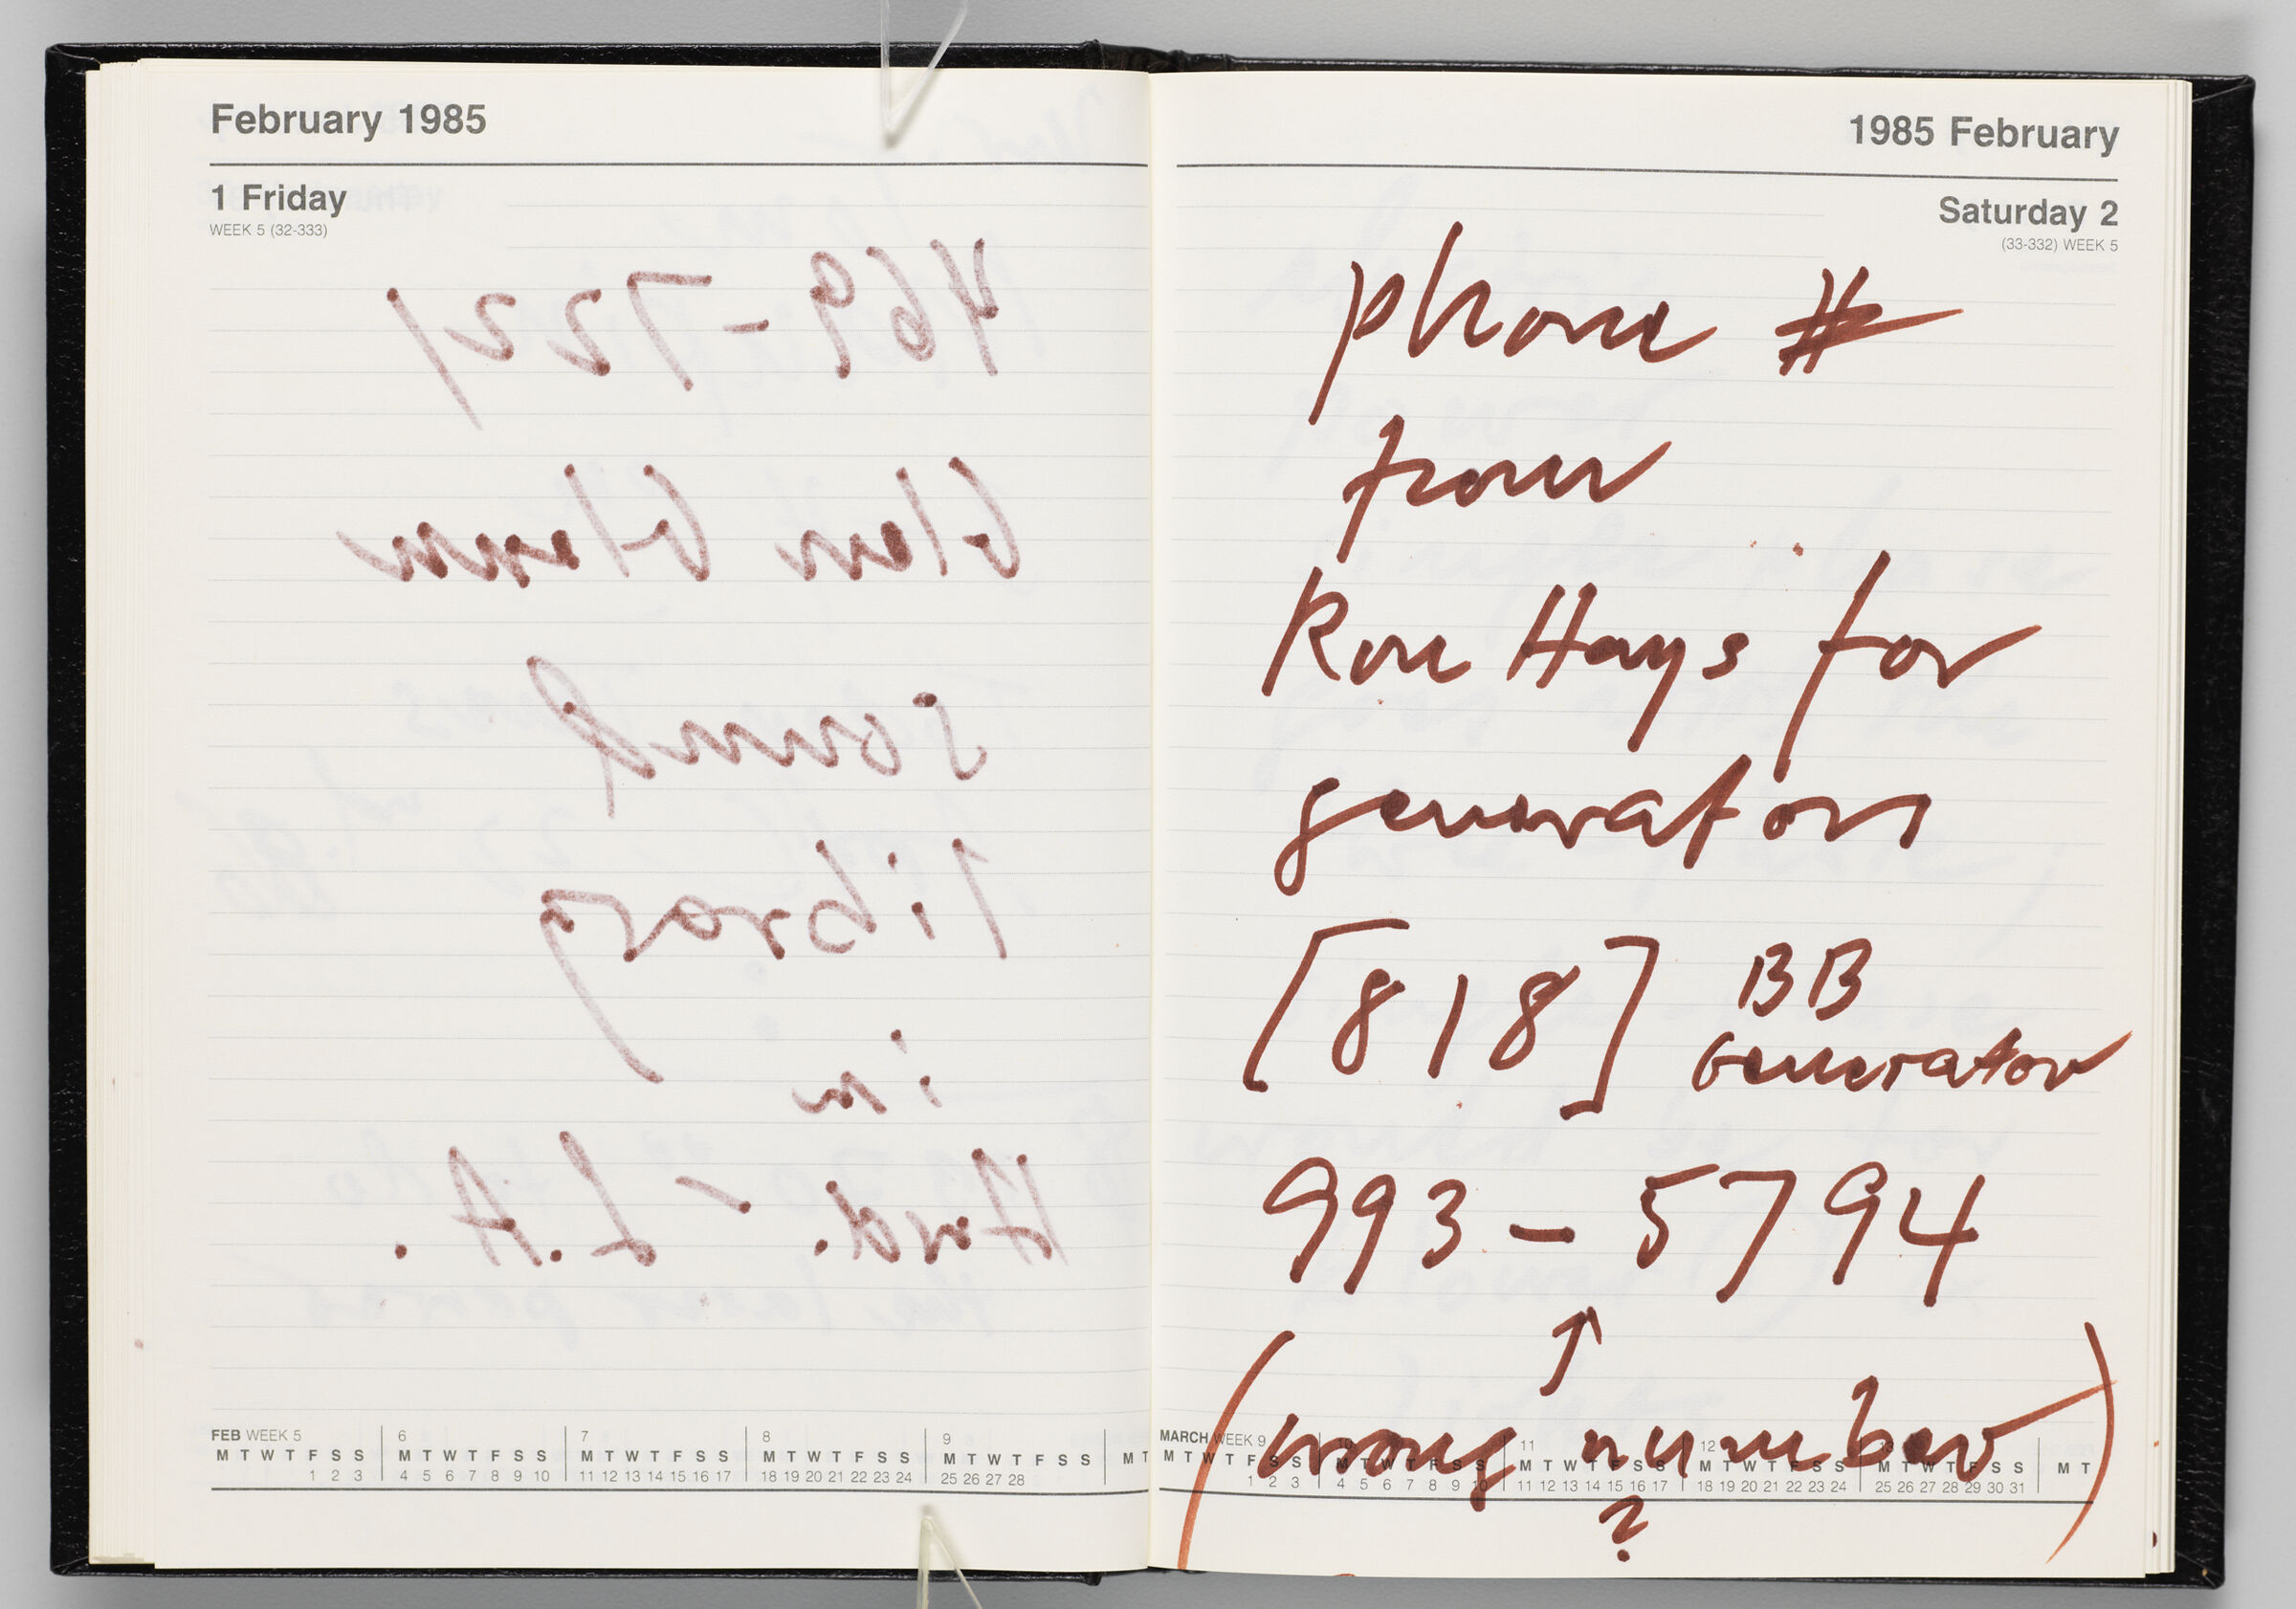 Untitled (Bleed-Through Of Previous Page, Left Page); Untitled (Notes On Calendar Page February 2, 1985, Right Page)